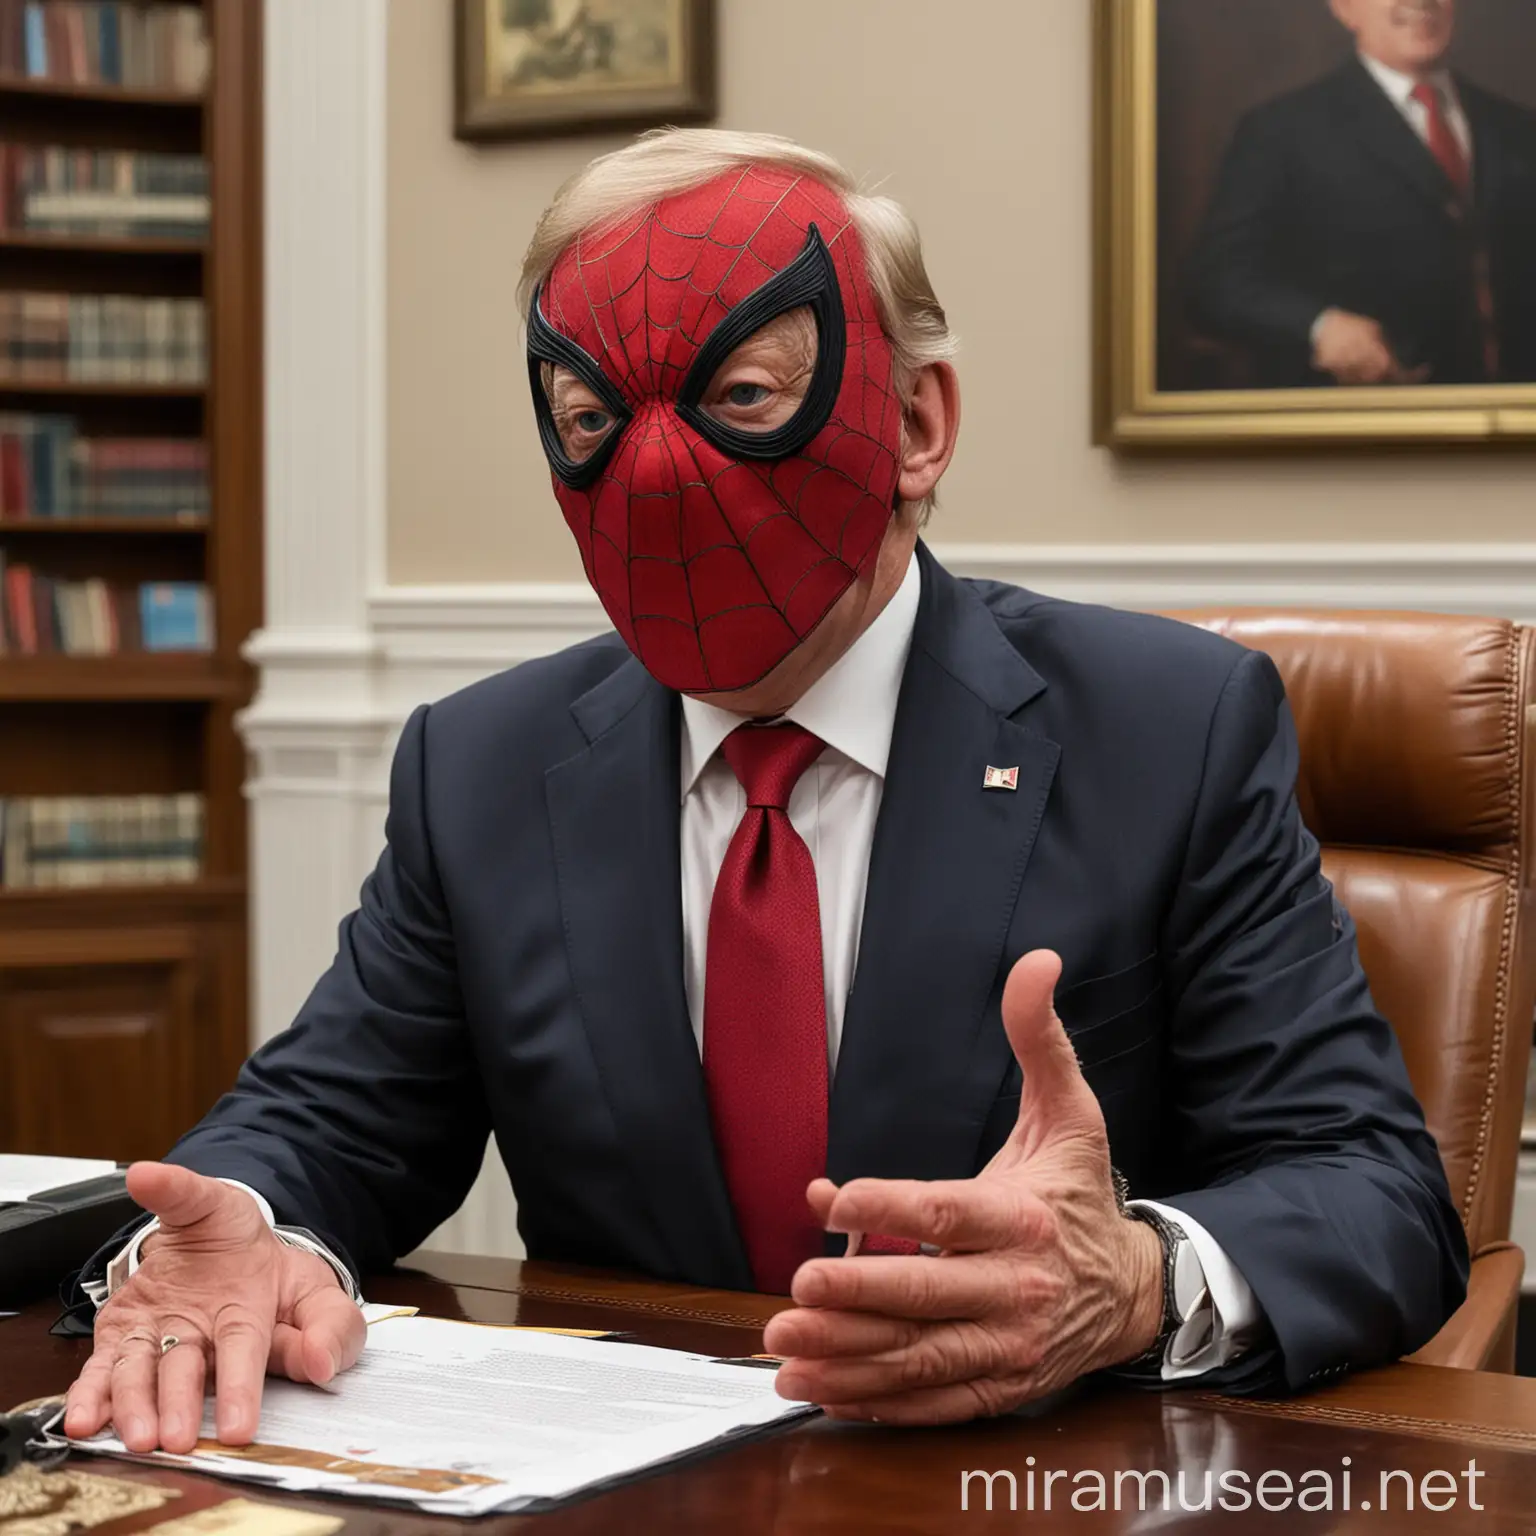 Country President in SpiderMan Mask at Office Desk